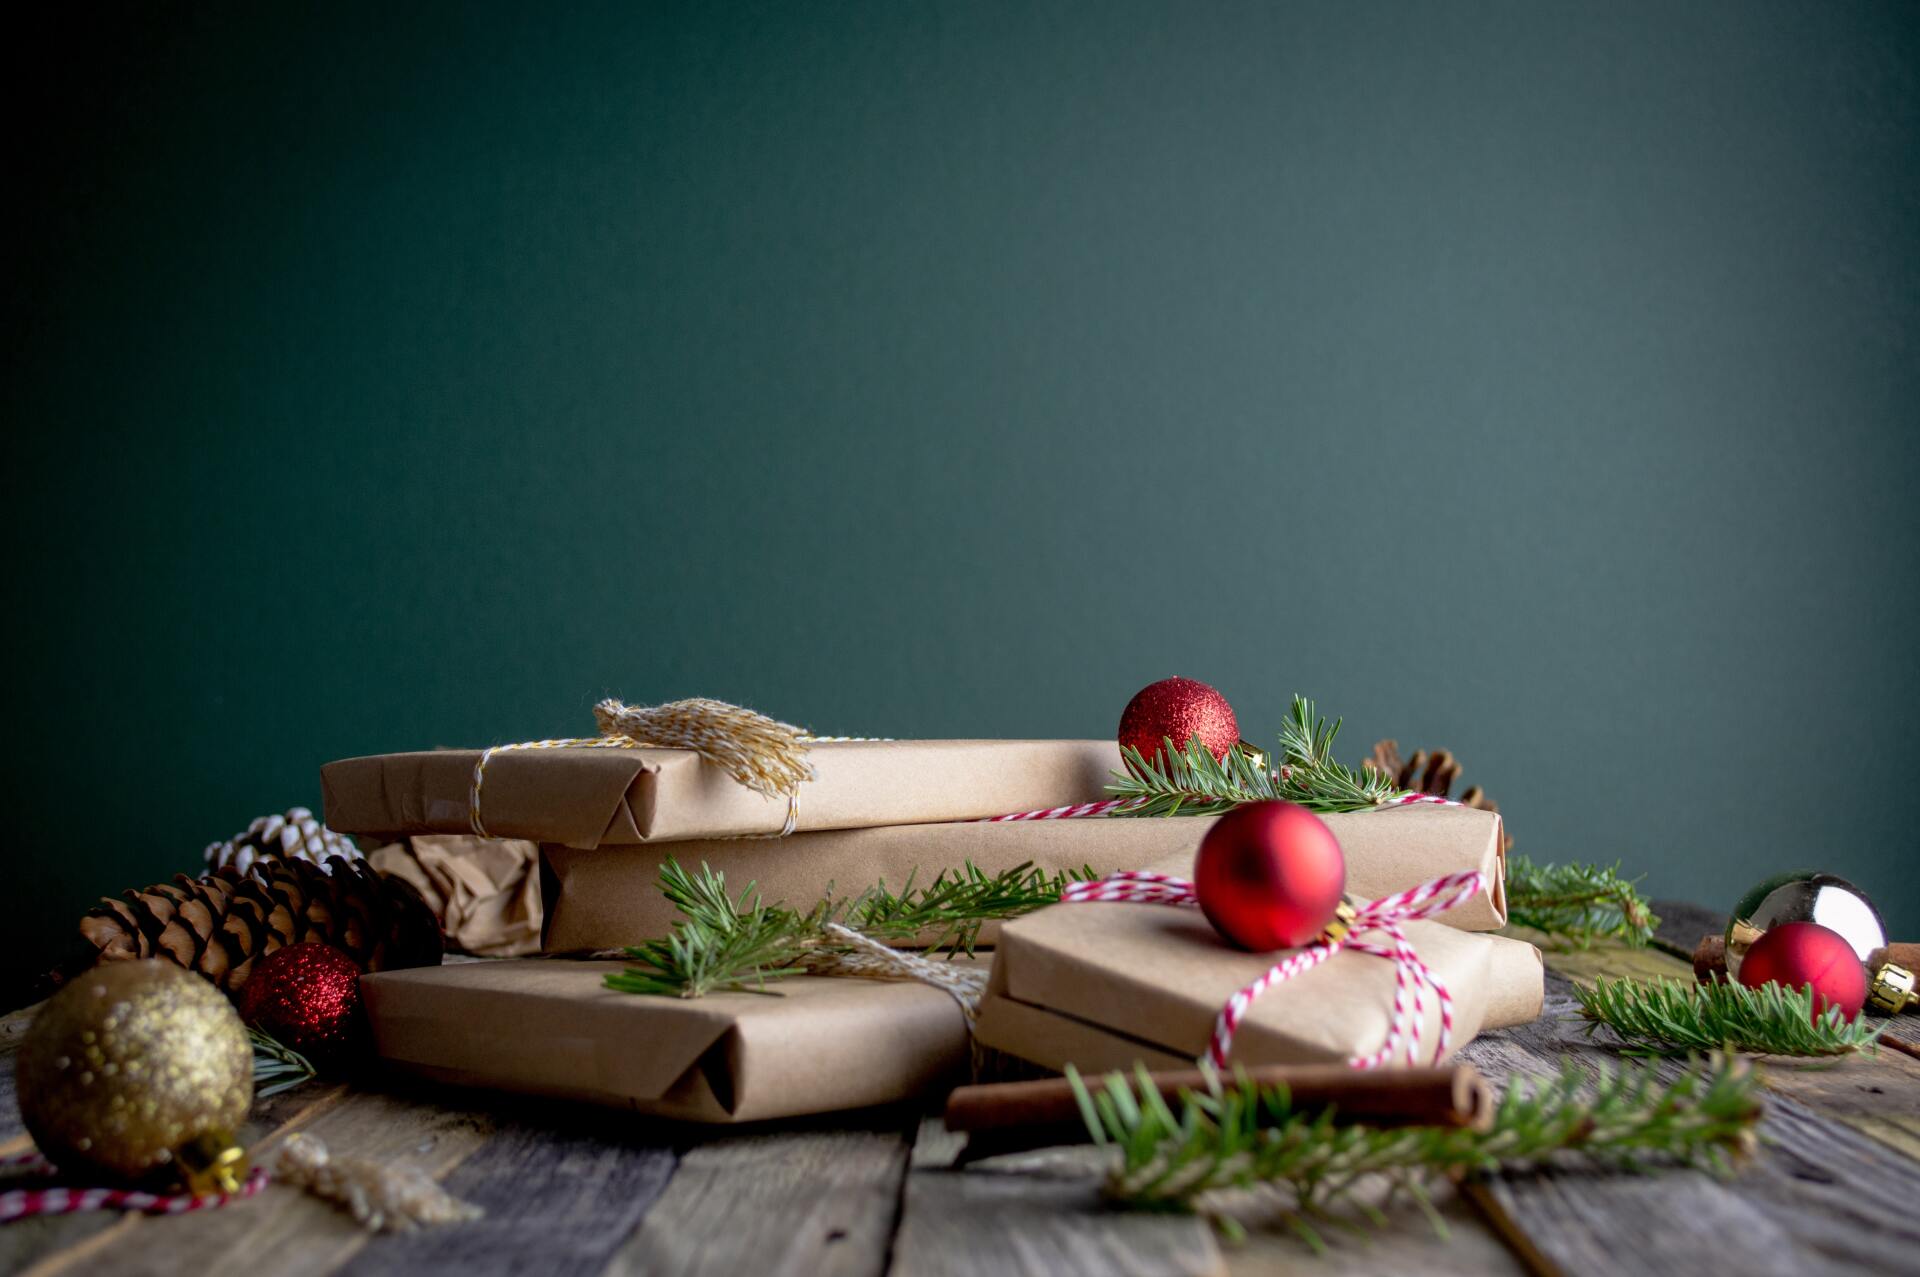 Christmas gifts in plain paper, surrounded by baubles and pine needles